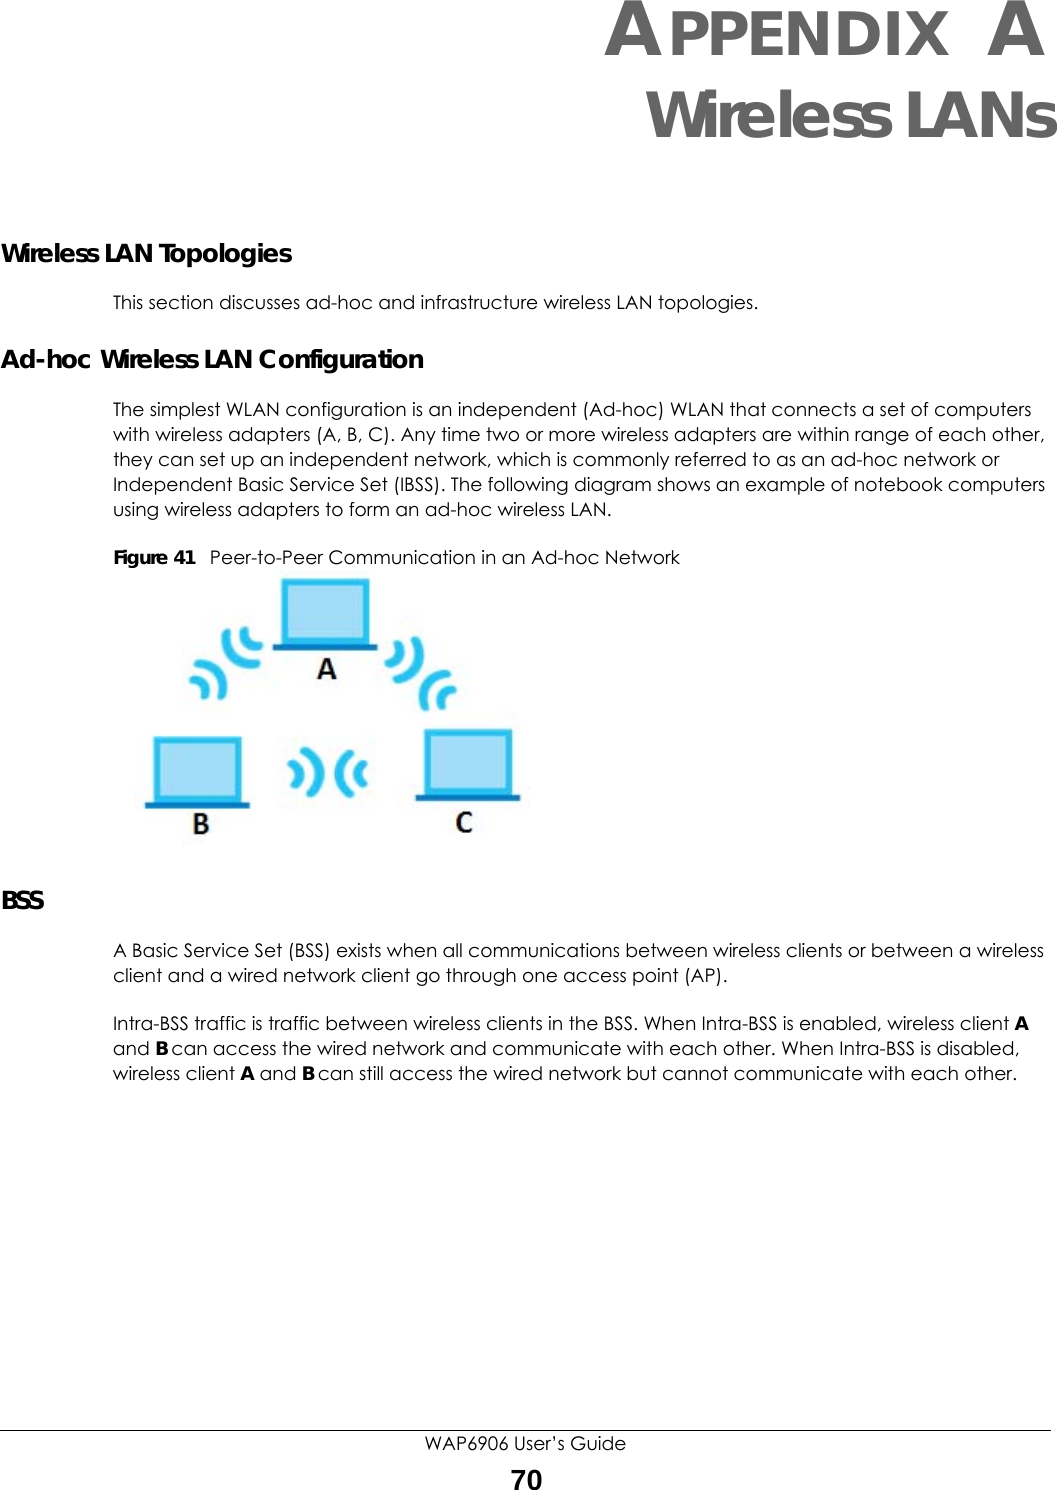 WAP6906 User’s Guide70APPENDIX AWireless LANsWireless LAN TopologiesThis section discusses ad-hoc and infrastructure wireless LAN topologies.Ad-hoc Wireless LAN ConfigurationThe simplest WLAN configuration is an independent (Ad-hoc) WLAN that connects a set of computers with wireless adapters (A, B, C). Any time two or more wireless adapters are within range of each other, they can set up an independent network, which is commonly referred to as an ad-hoc network or Independent Basic Service Set (IBSS). The following diagram shows an example of notebook computers using wireless adapters to form an ad-hoc wireless LAN. Figure 41   Peer-to-Peer Communication in an Ad-hoc NetworkBSSA Basic Service Set (BSS) exists when all communications between wireless clients or between a wireless client and a wired network client go through one access point (AP). Intra-BSS traffic is traffic between wireless clients in the BSS. When Intra-BSS is enabled, wireless client A and B can access the wired network and communicate with each other. When Intra-BSS is disabled, wireless client A and B can still access the wired network but cannot communicate with each other.